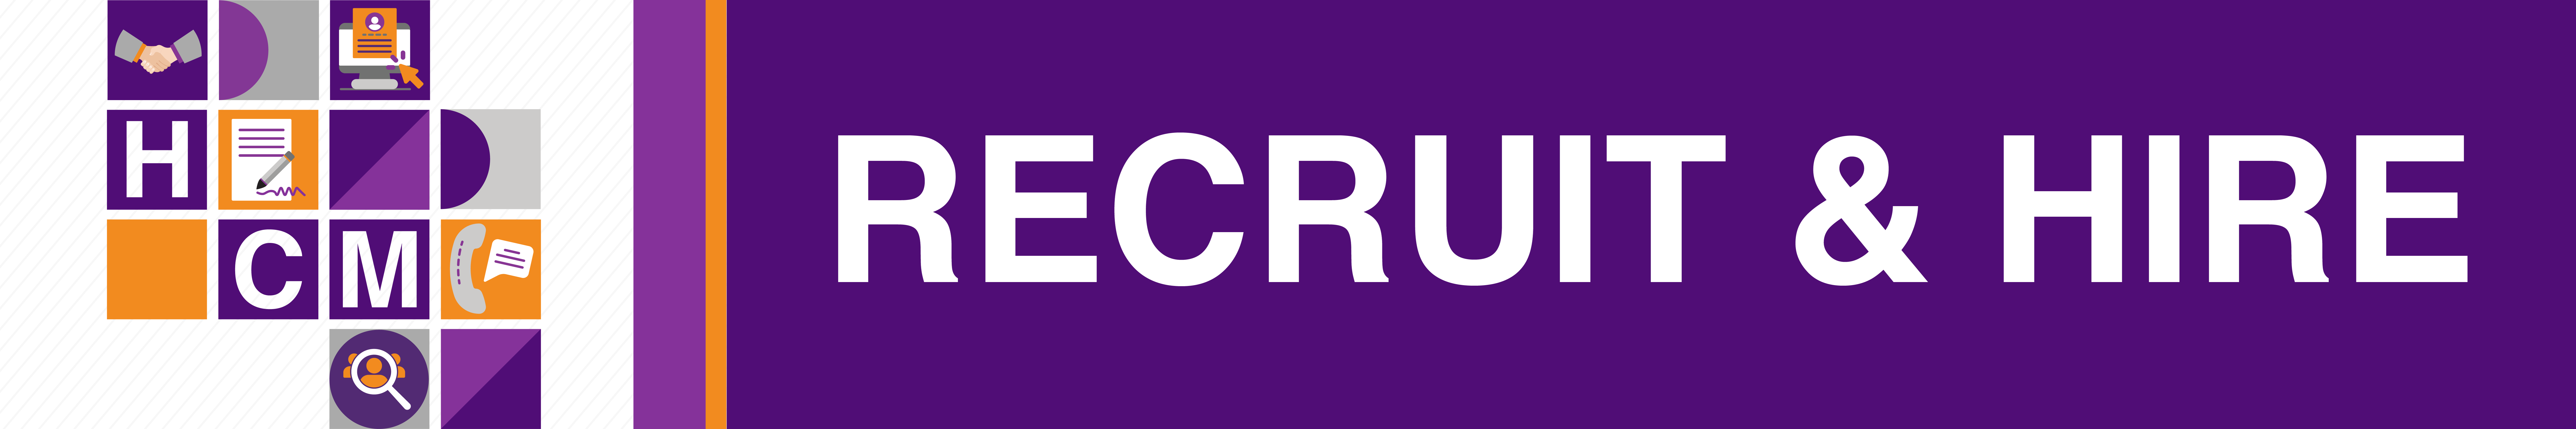 Recruit and hire 